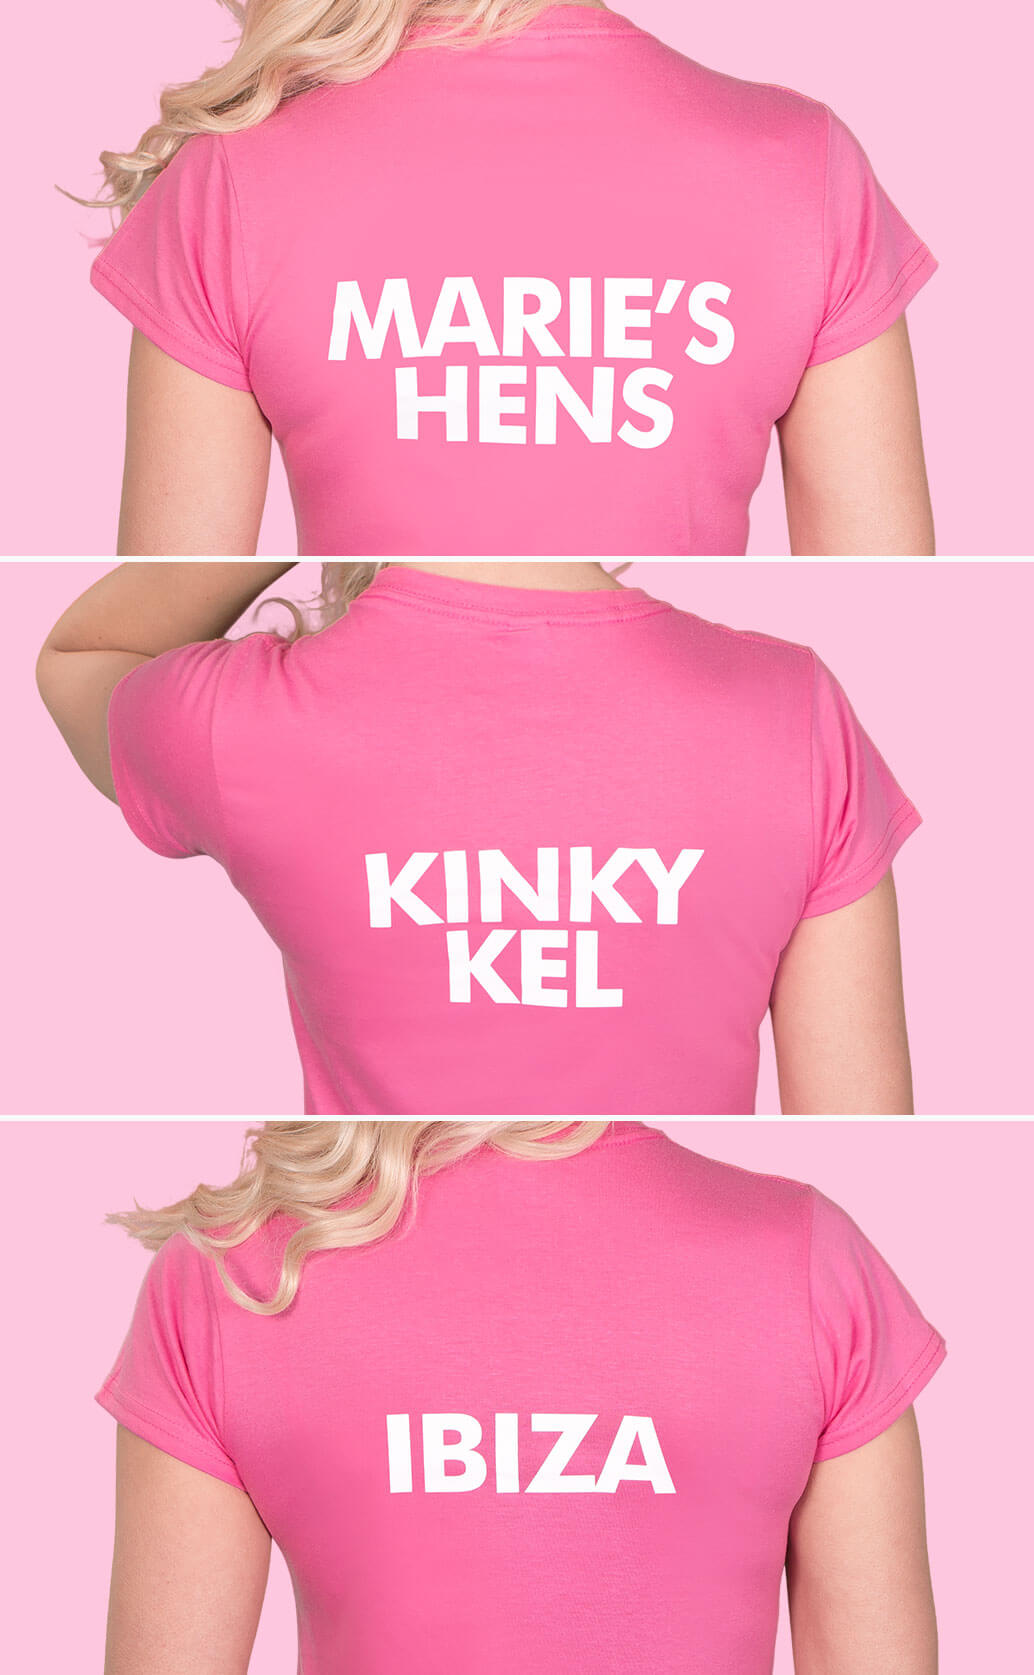 Three close-up shots of models wearing azalea pink lady fit t shirts. Photographed from behind to show back name prints in white. First shot has ‘Marie’s Hens’, second shot has ‘Kinky Kel’ and third has ‘Ibiza’. Light pink background